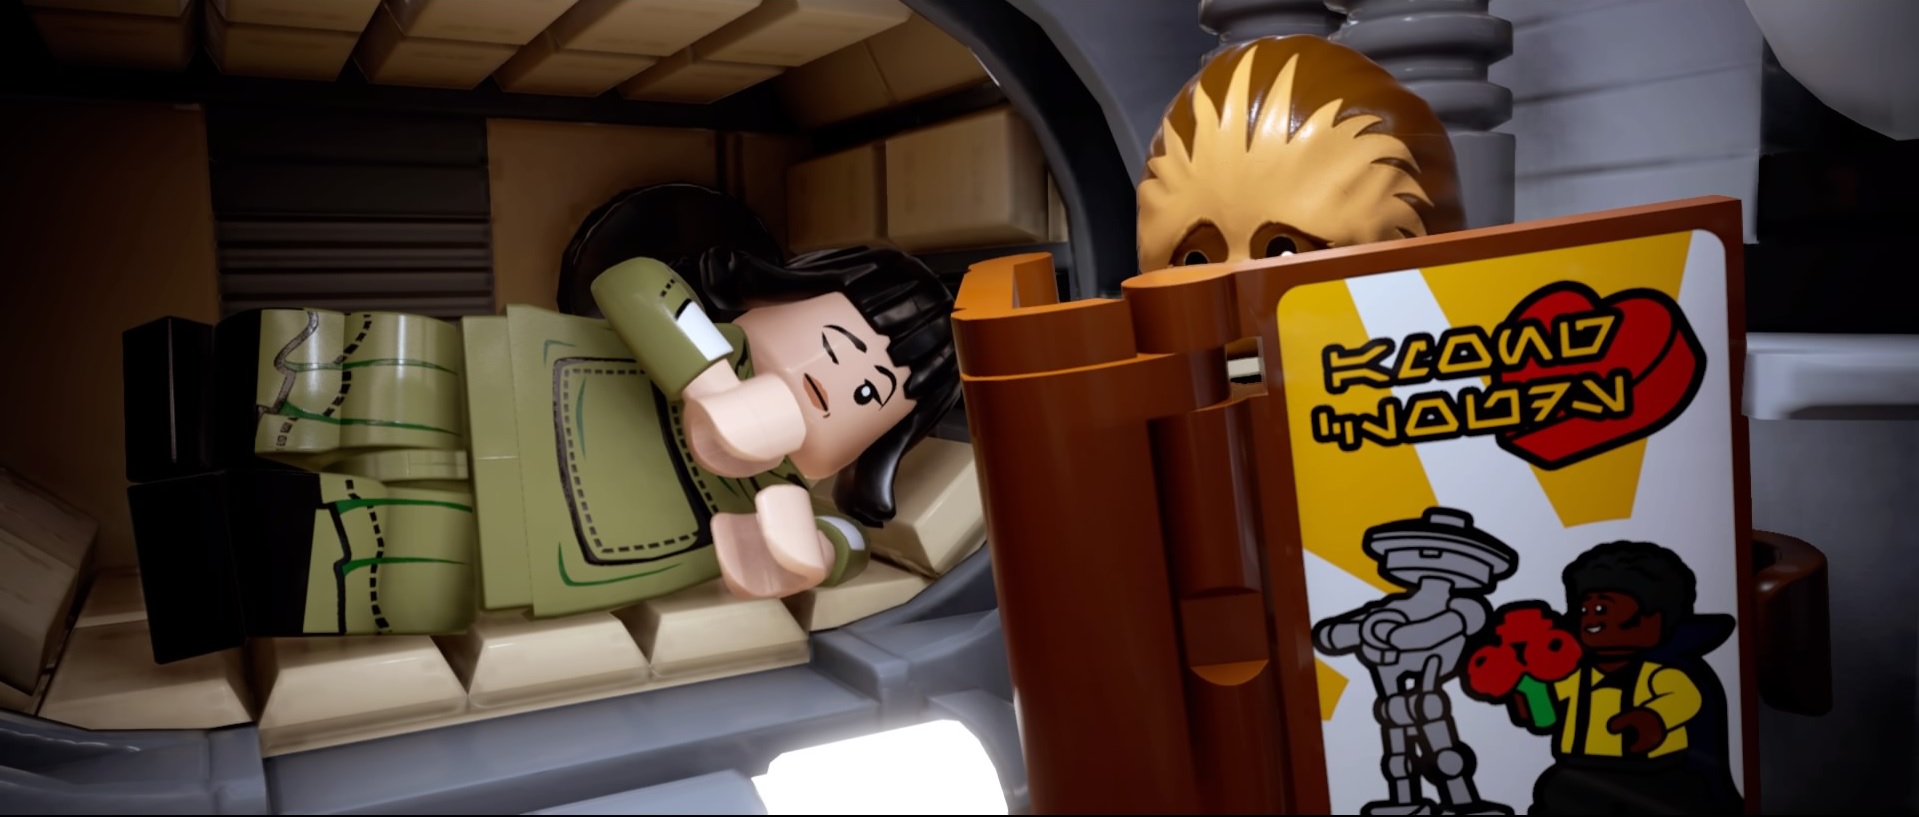 Lego Chewbacca reads a Lego book to a lounging Lego Rose Tico